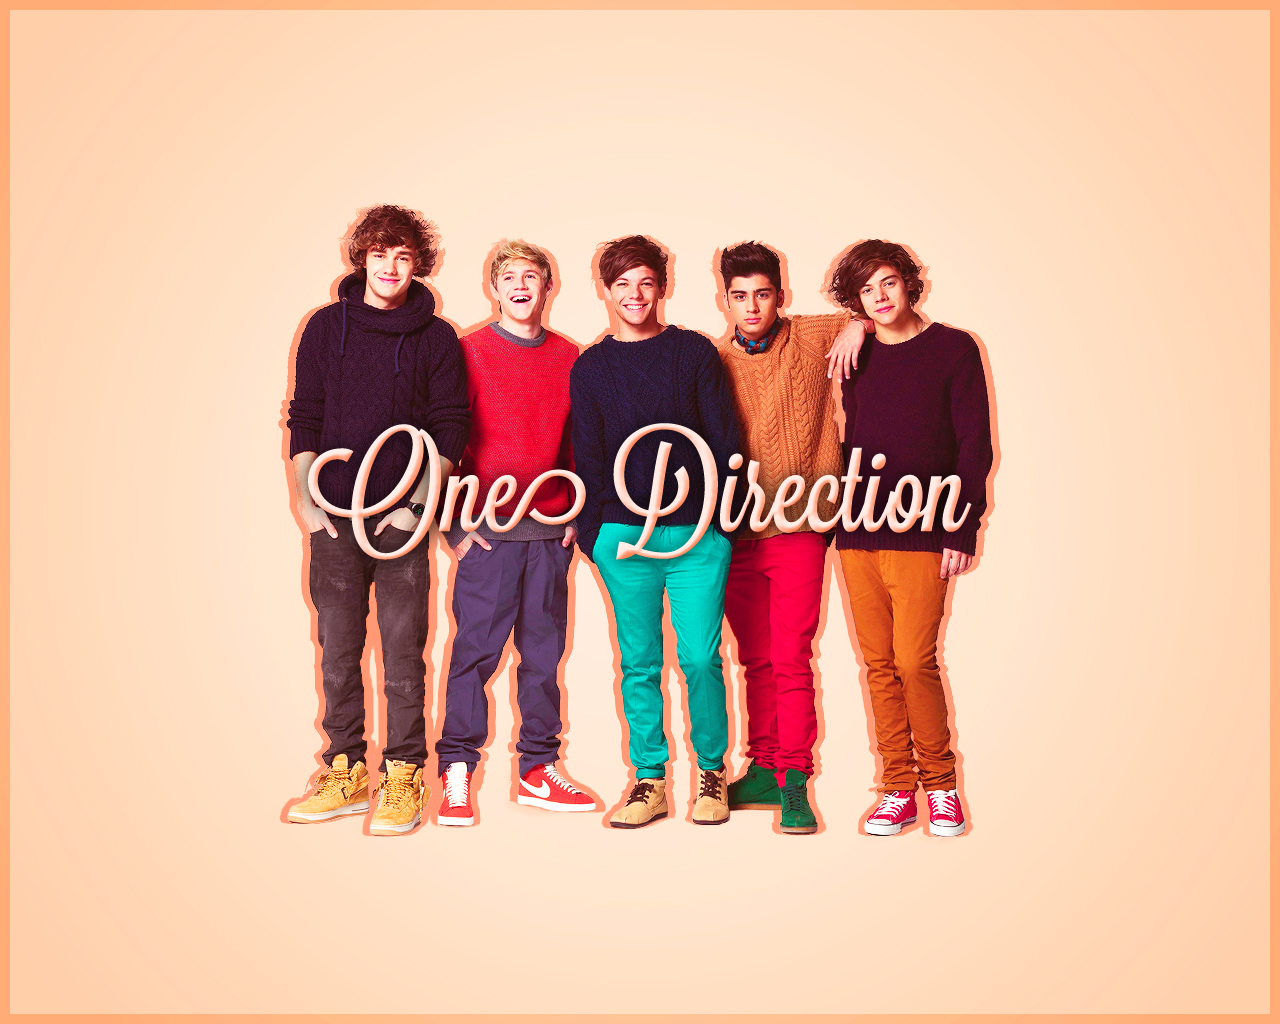 1d One Direction Wallpaper